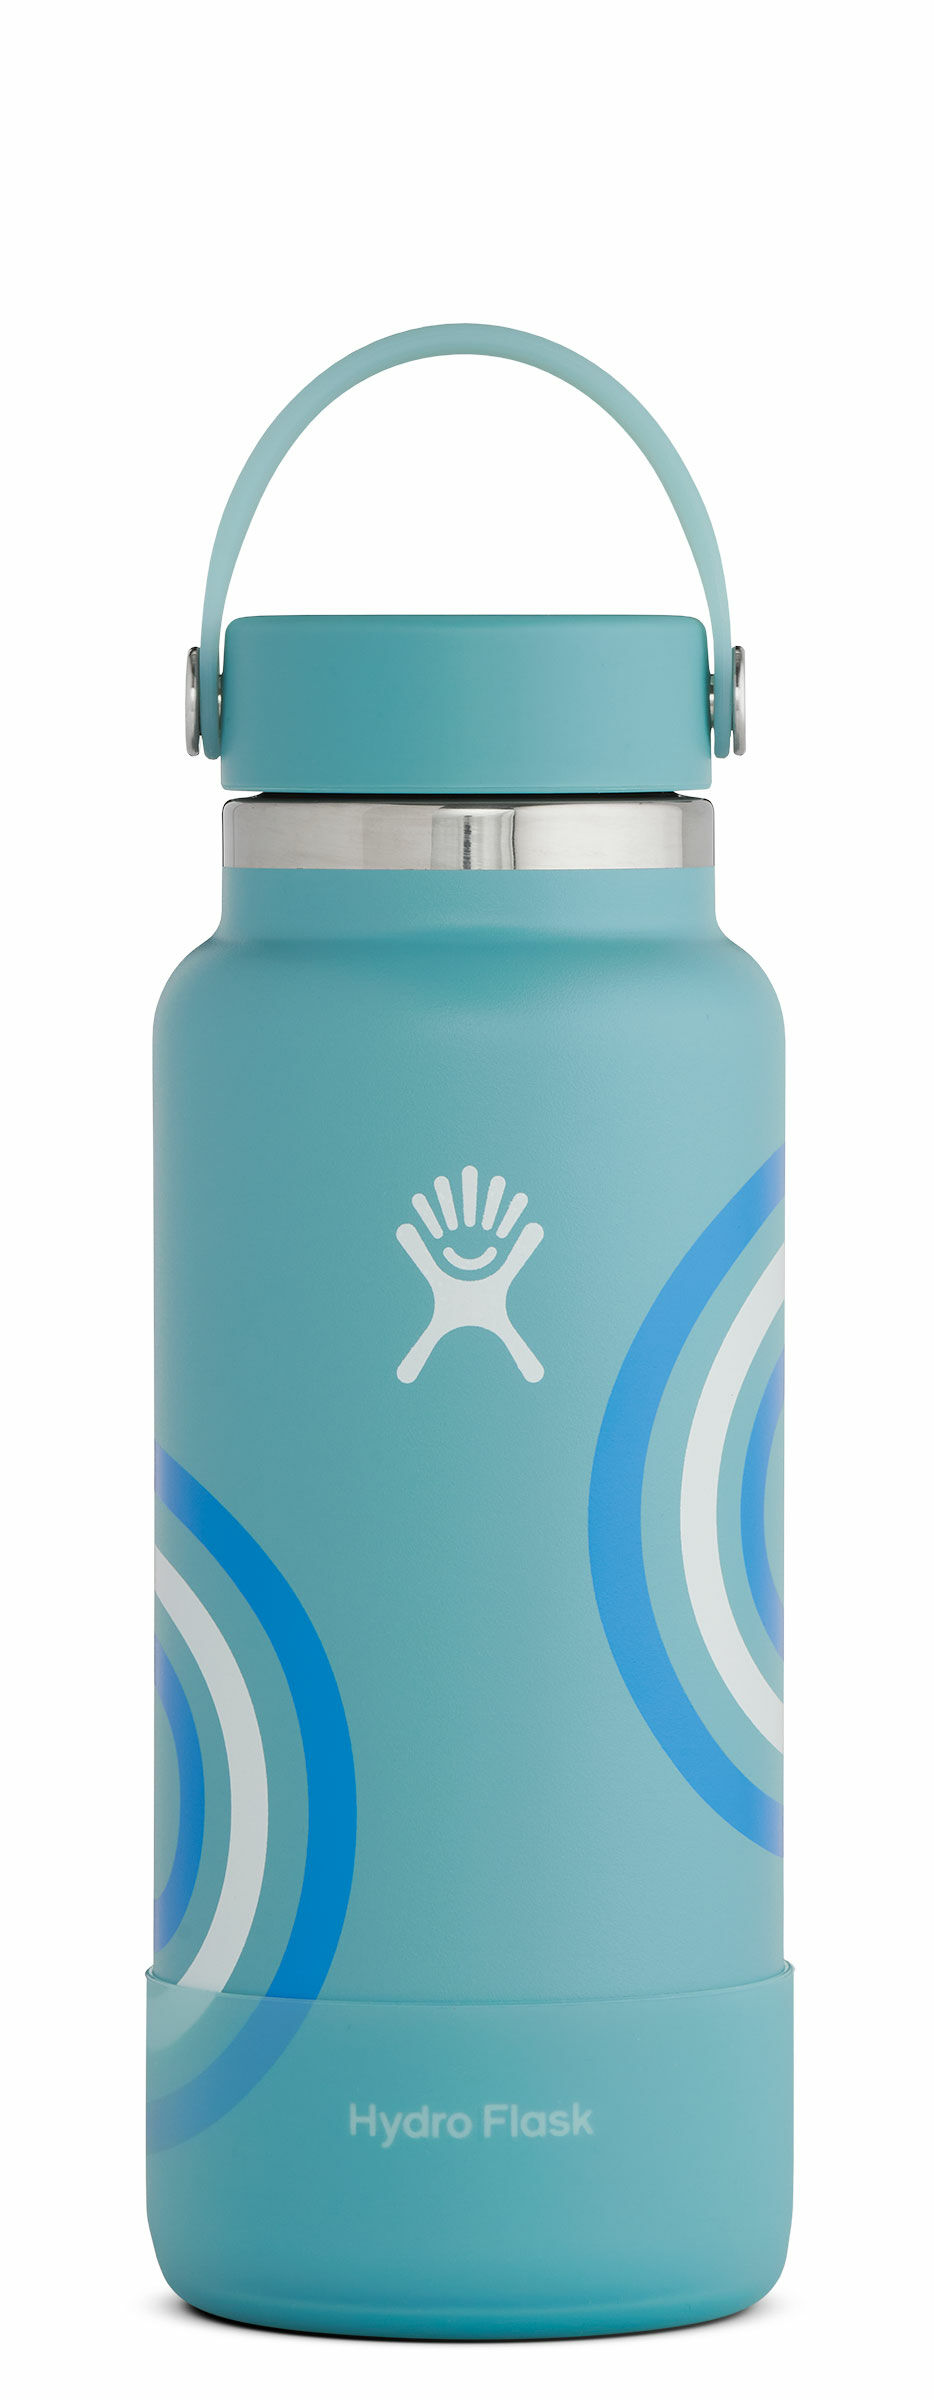 32-Oz Wide Mouth Flask with Boot In Bayou - Coolers & Hydration, Hydro  Flask